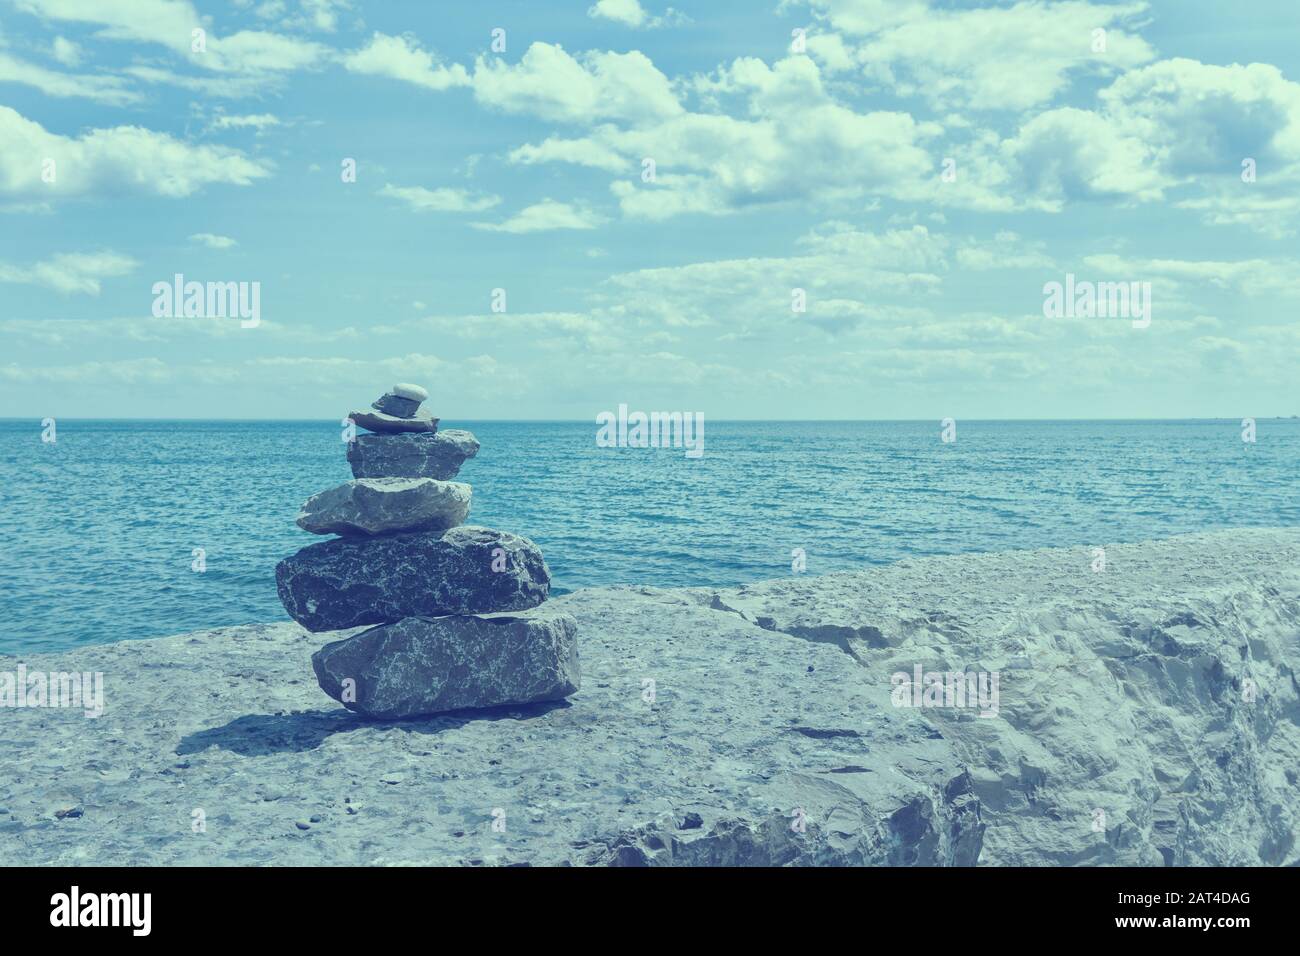 We were here - View on Key Balmy Beach at Ontario, Canada, June 2019 Stock Photo